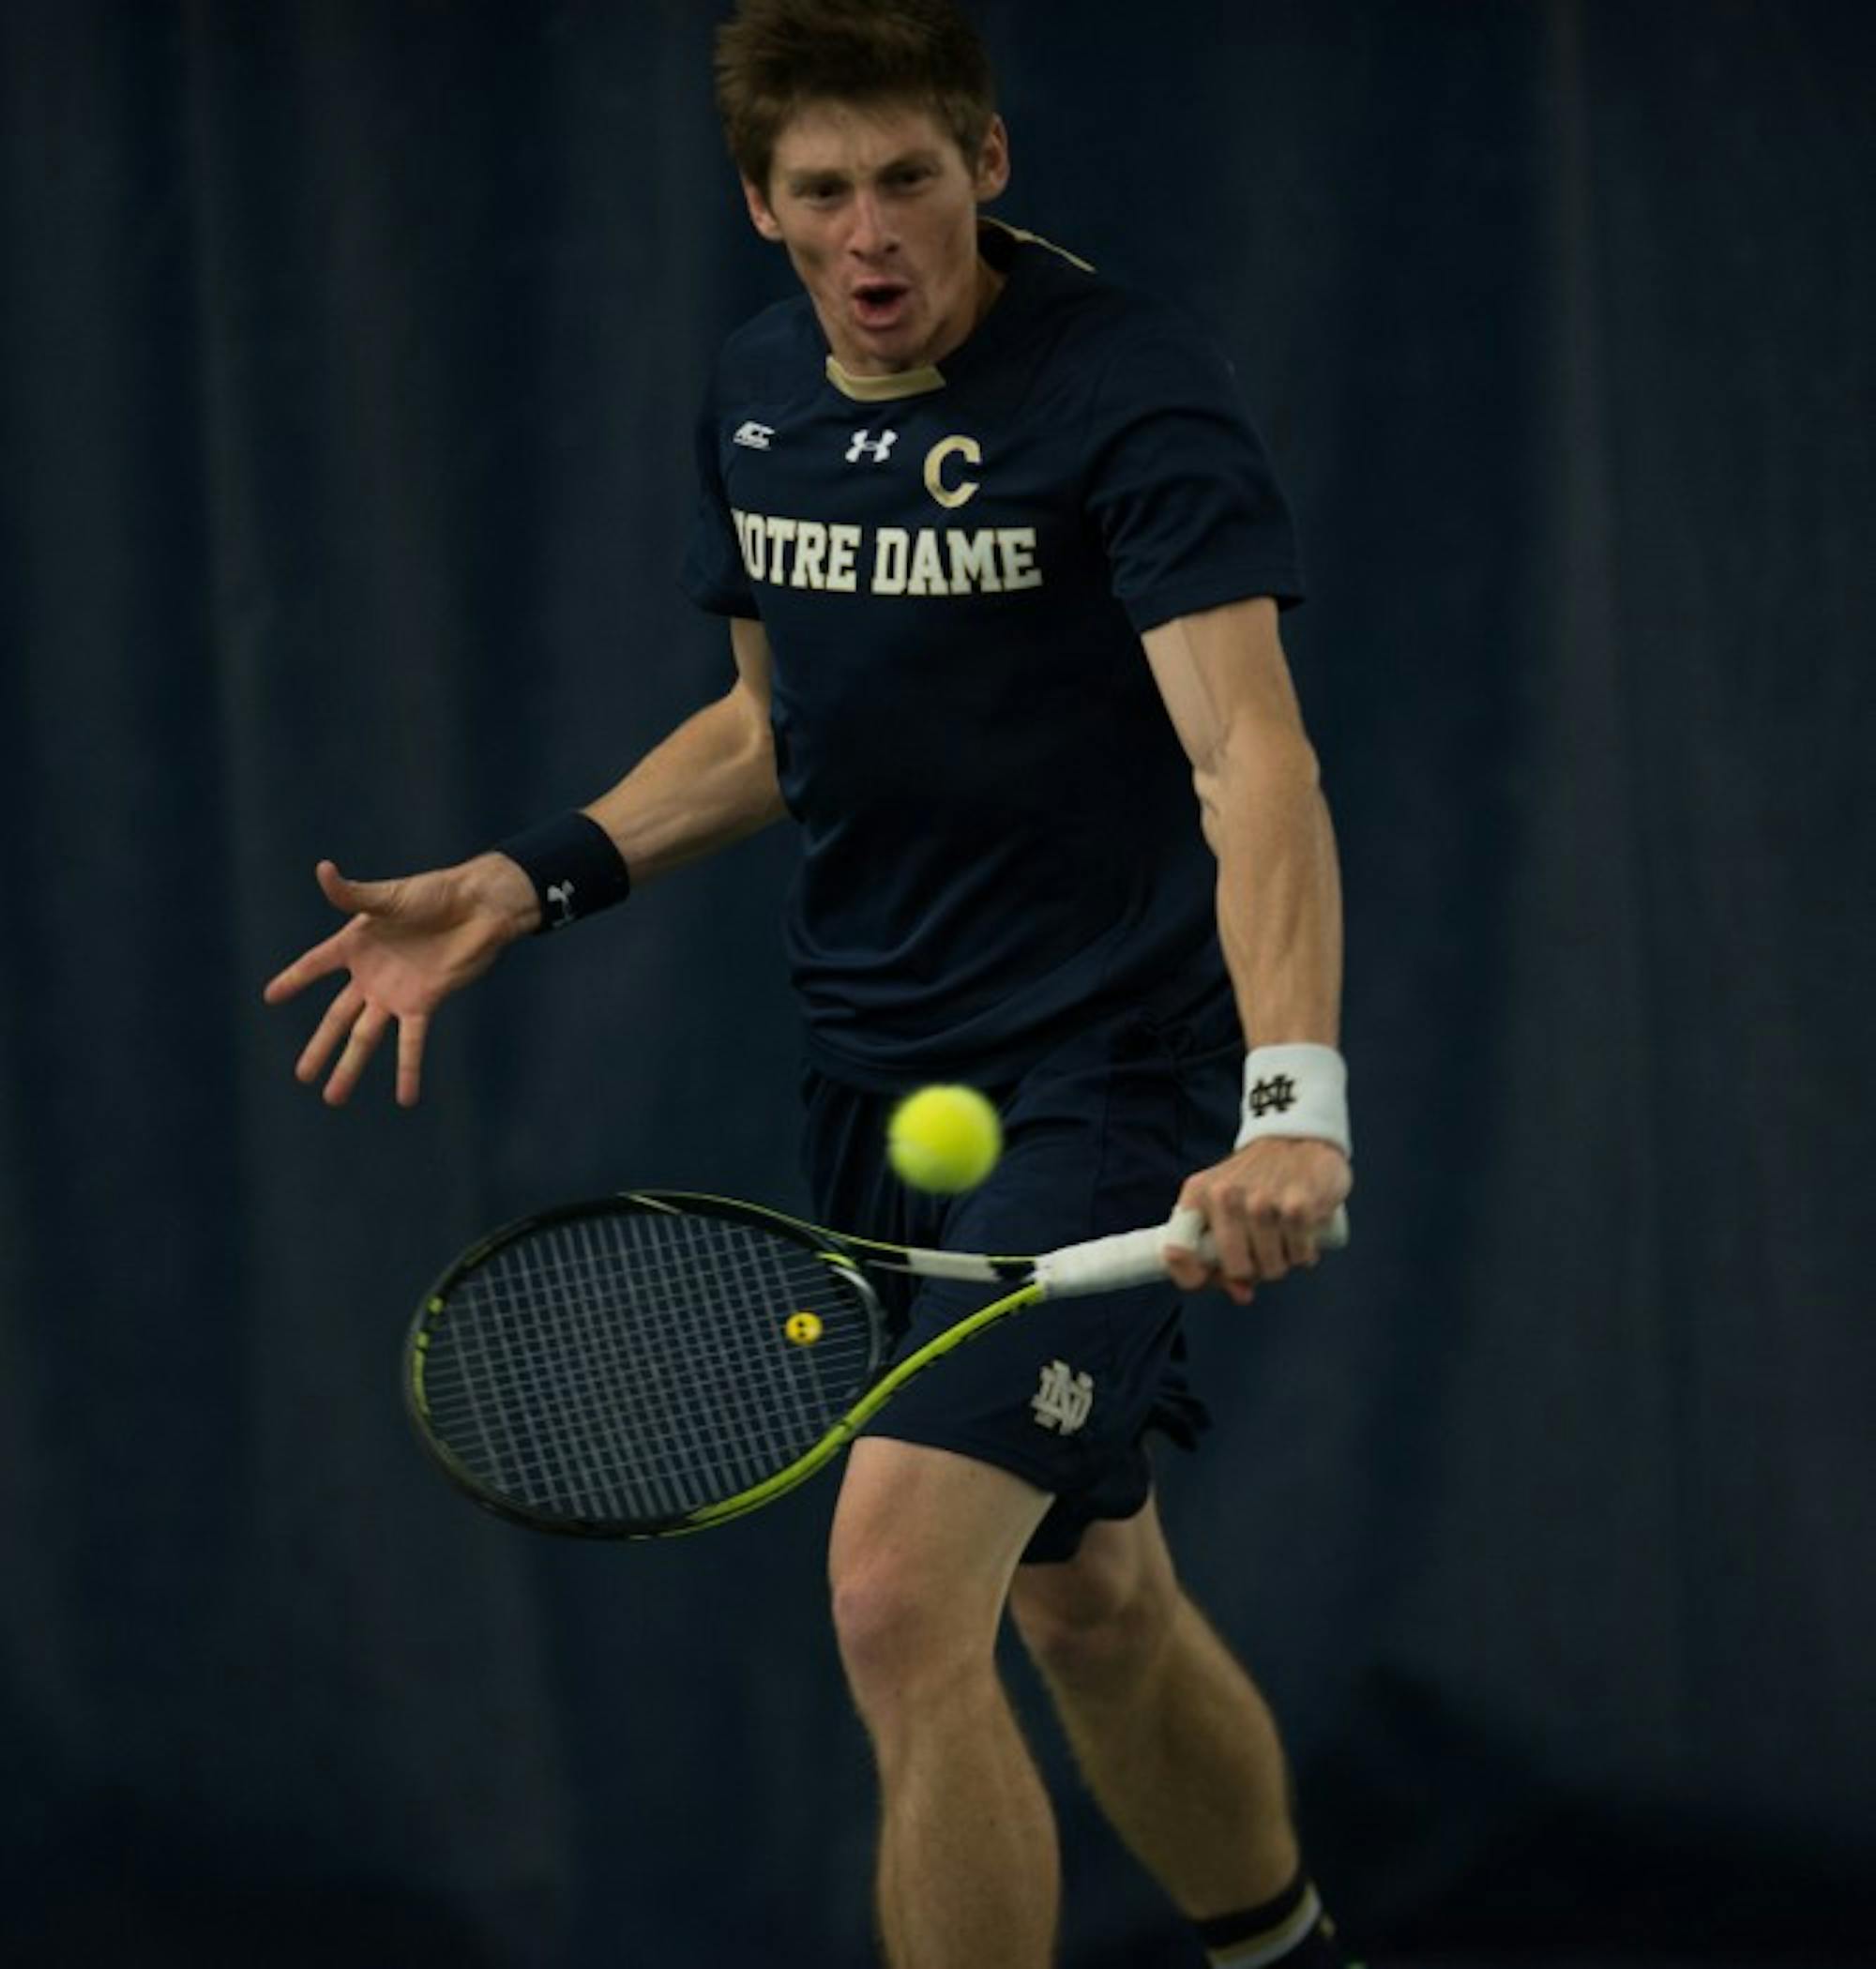 Junior Alex Lawson strikes the ball during Notre Dame's 4-3 win over Oklahoma State on Jan. 24 at Eck Tennis Pavilion. Lawson lost in three sets to Cowboys senior Nicolai Ferringo.